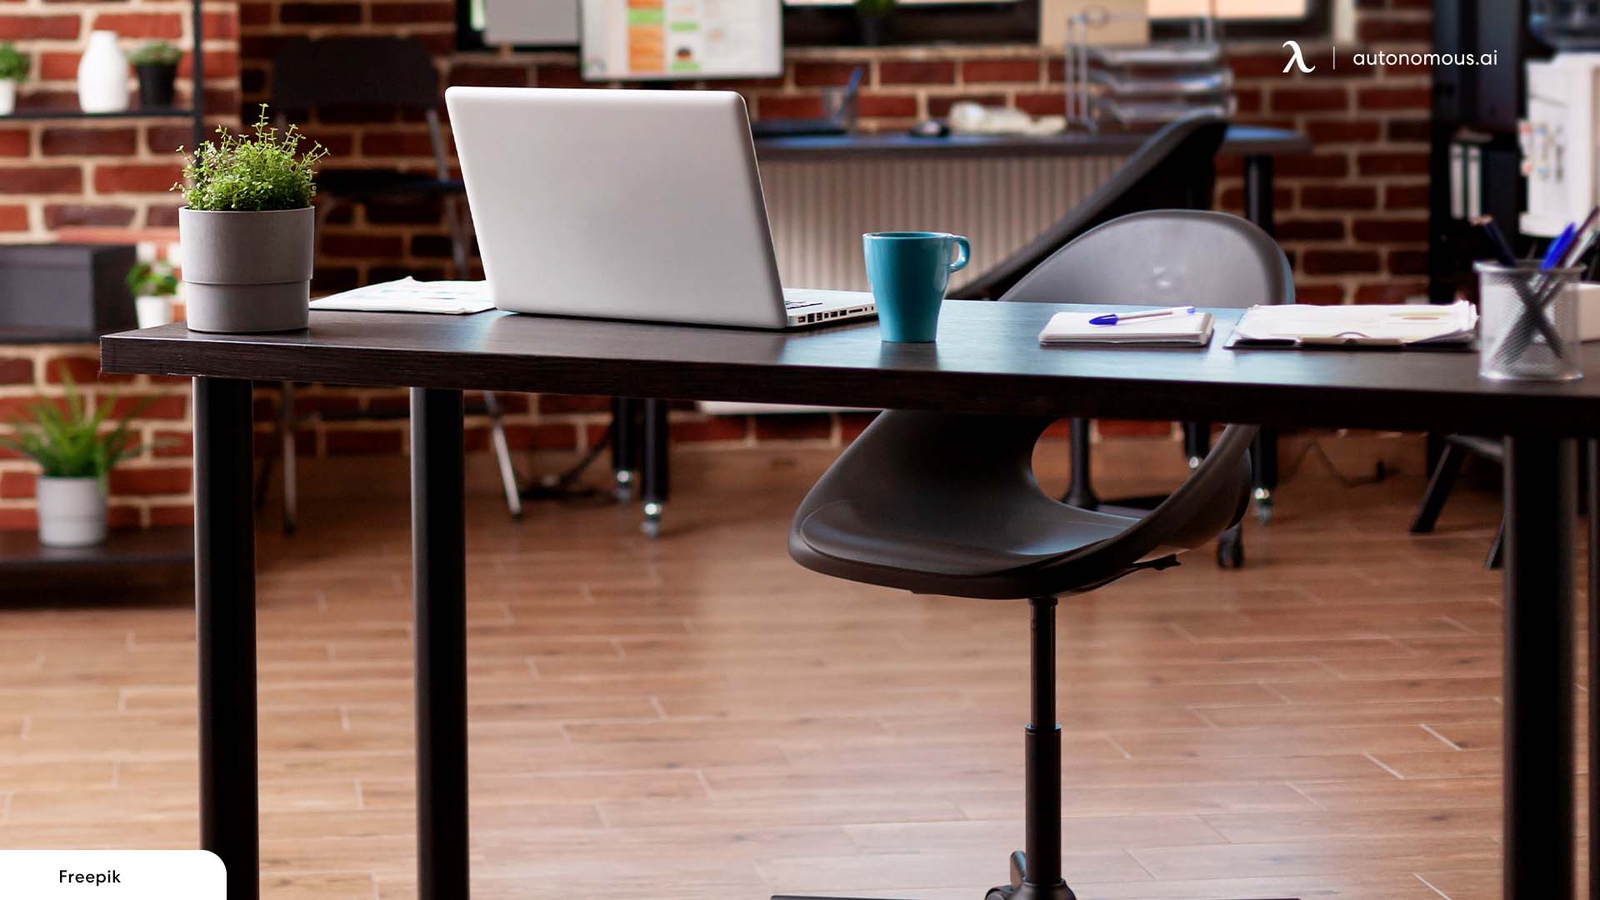 15 Best Desks for College Students on a Budget